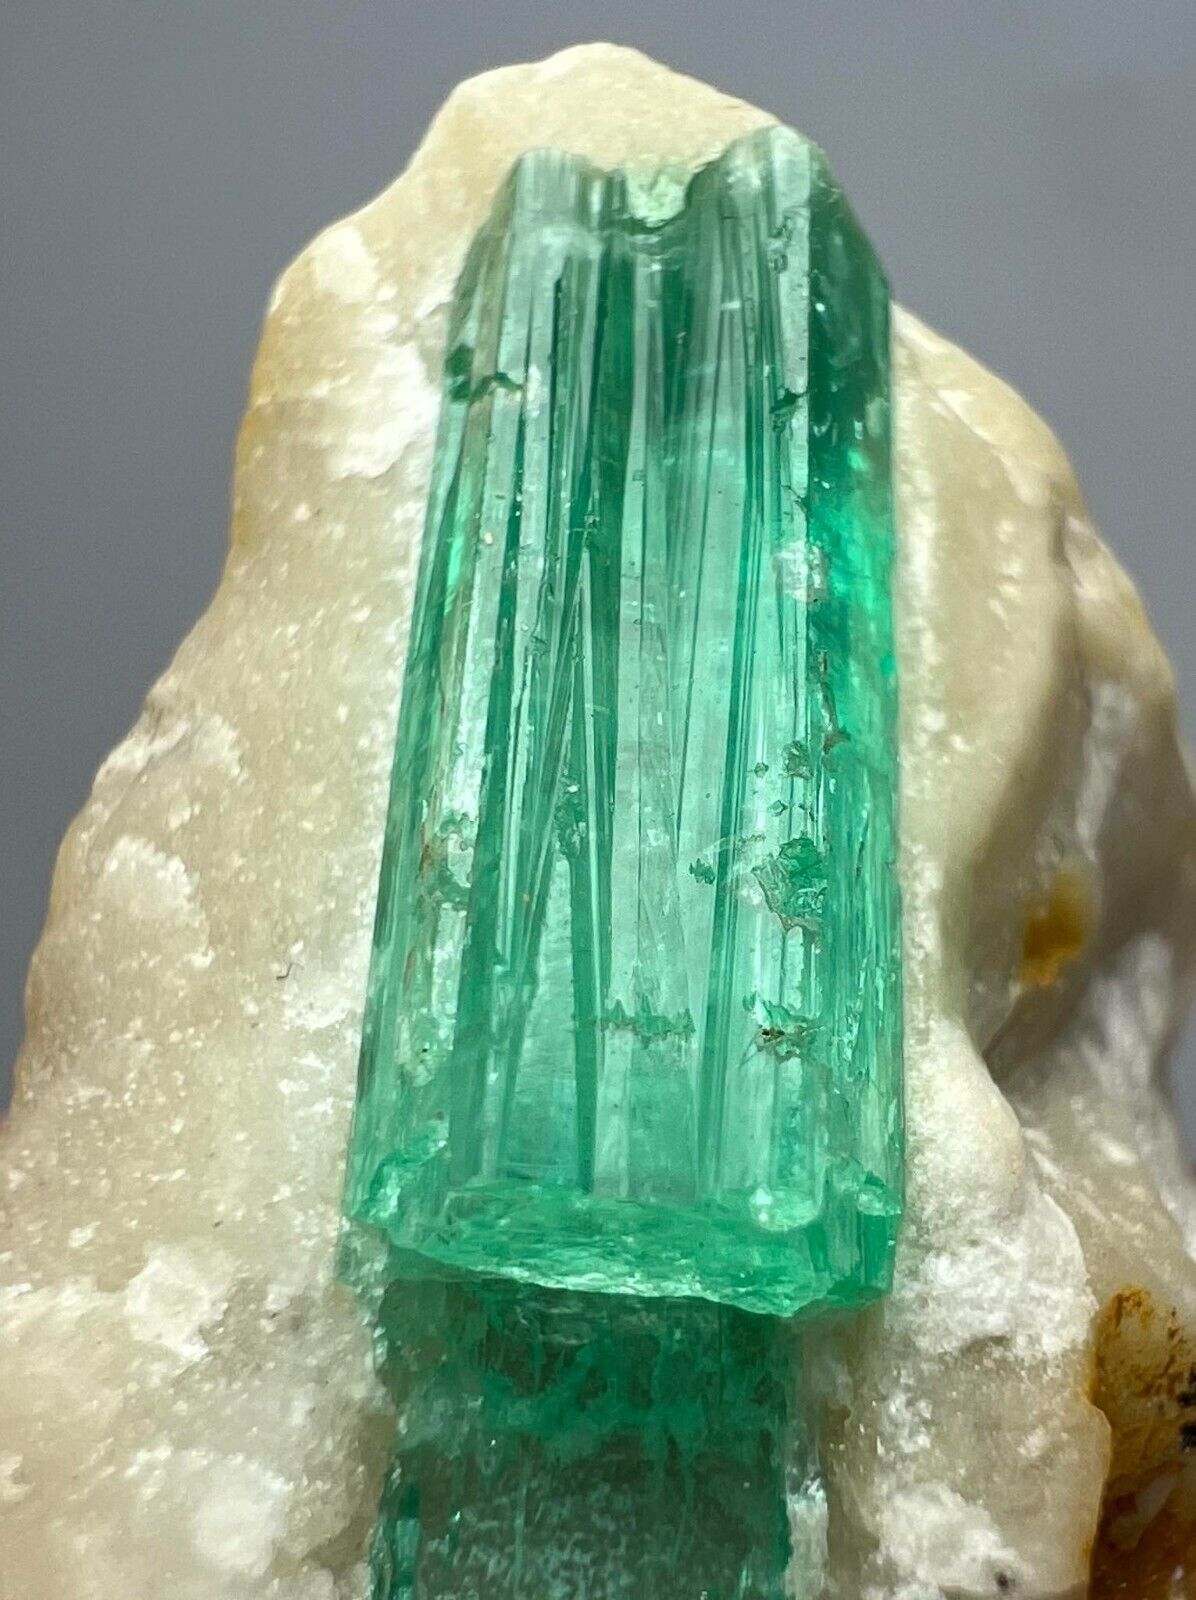 93 CT. Top Green Emerald Transparent Crystal On Matrix From Afghanistan